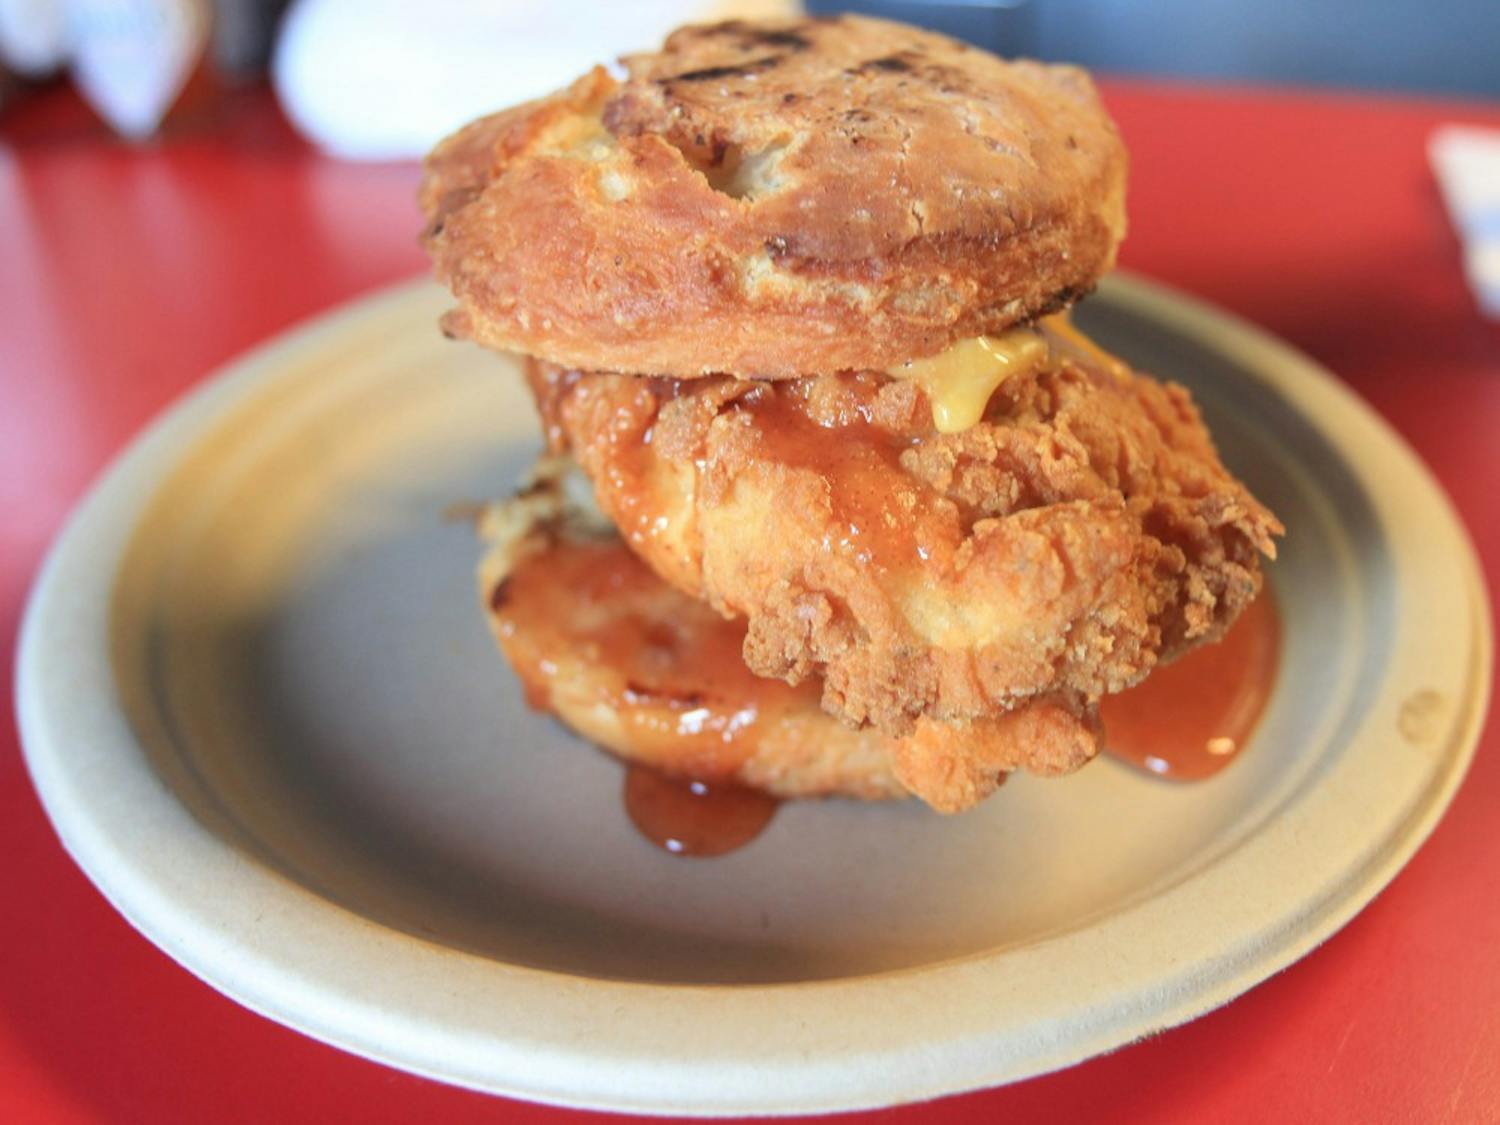 Fried chicken topped with homemade apple butter and a biscuit bun. Welcome Diner prides itself on the fact that most of their ingredients are purchased by local purveyors in the valley.
Photo by Dominic Valente